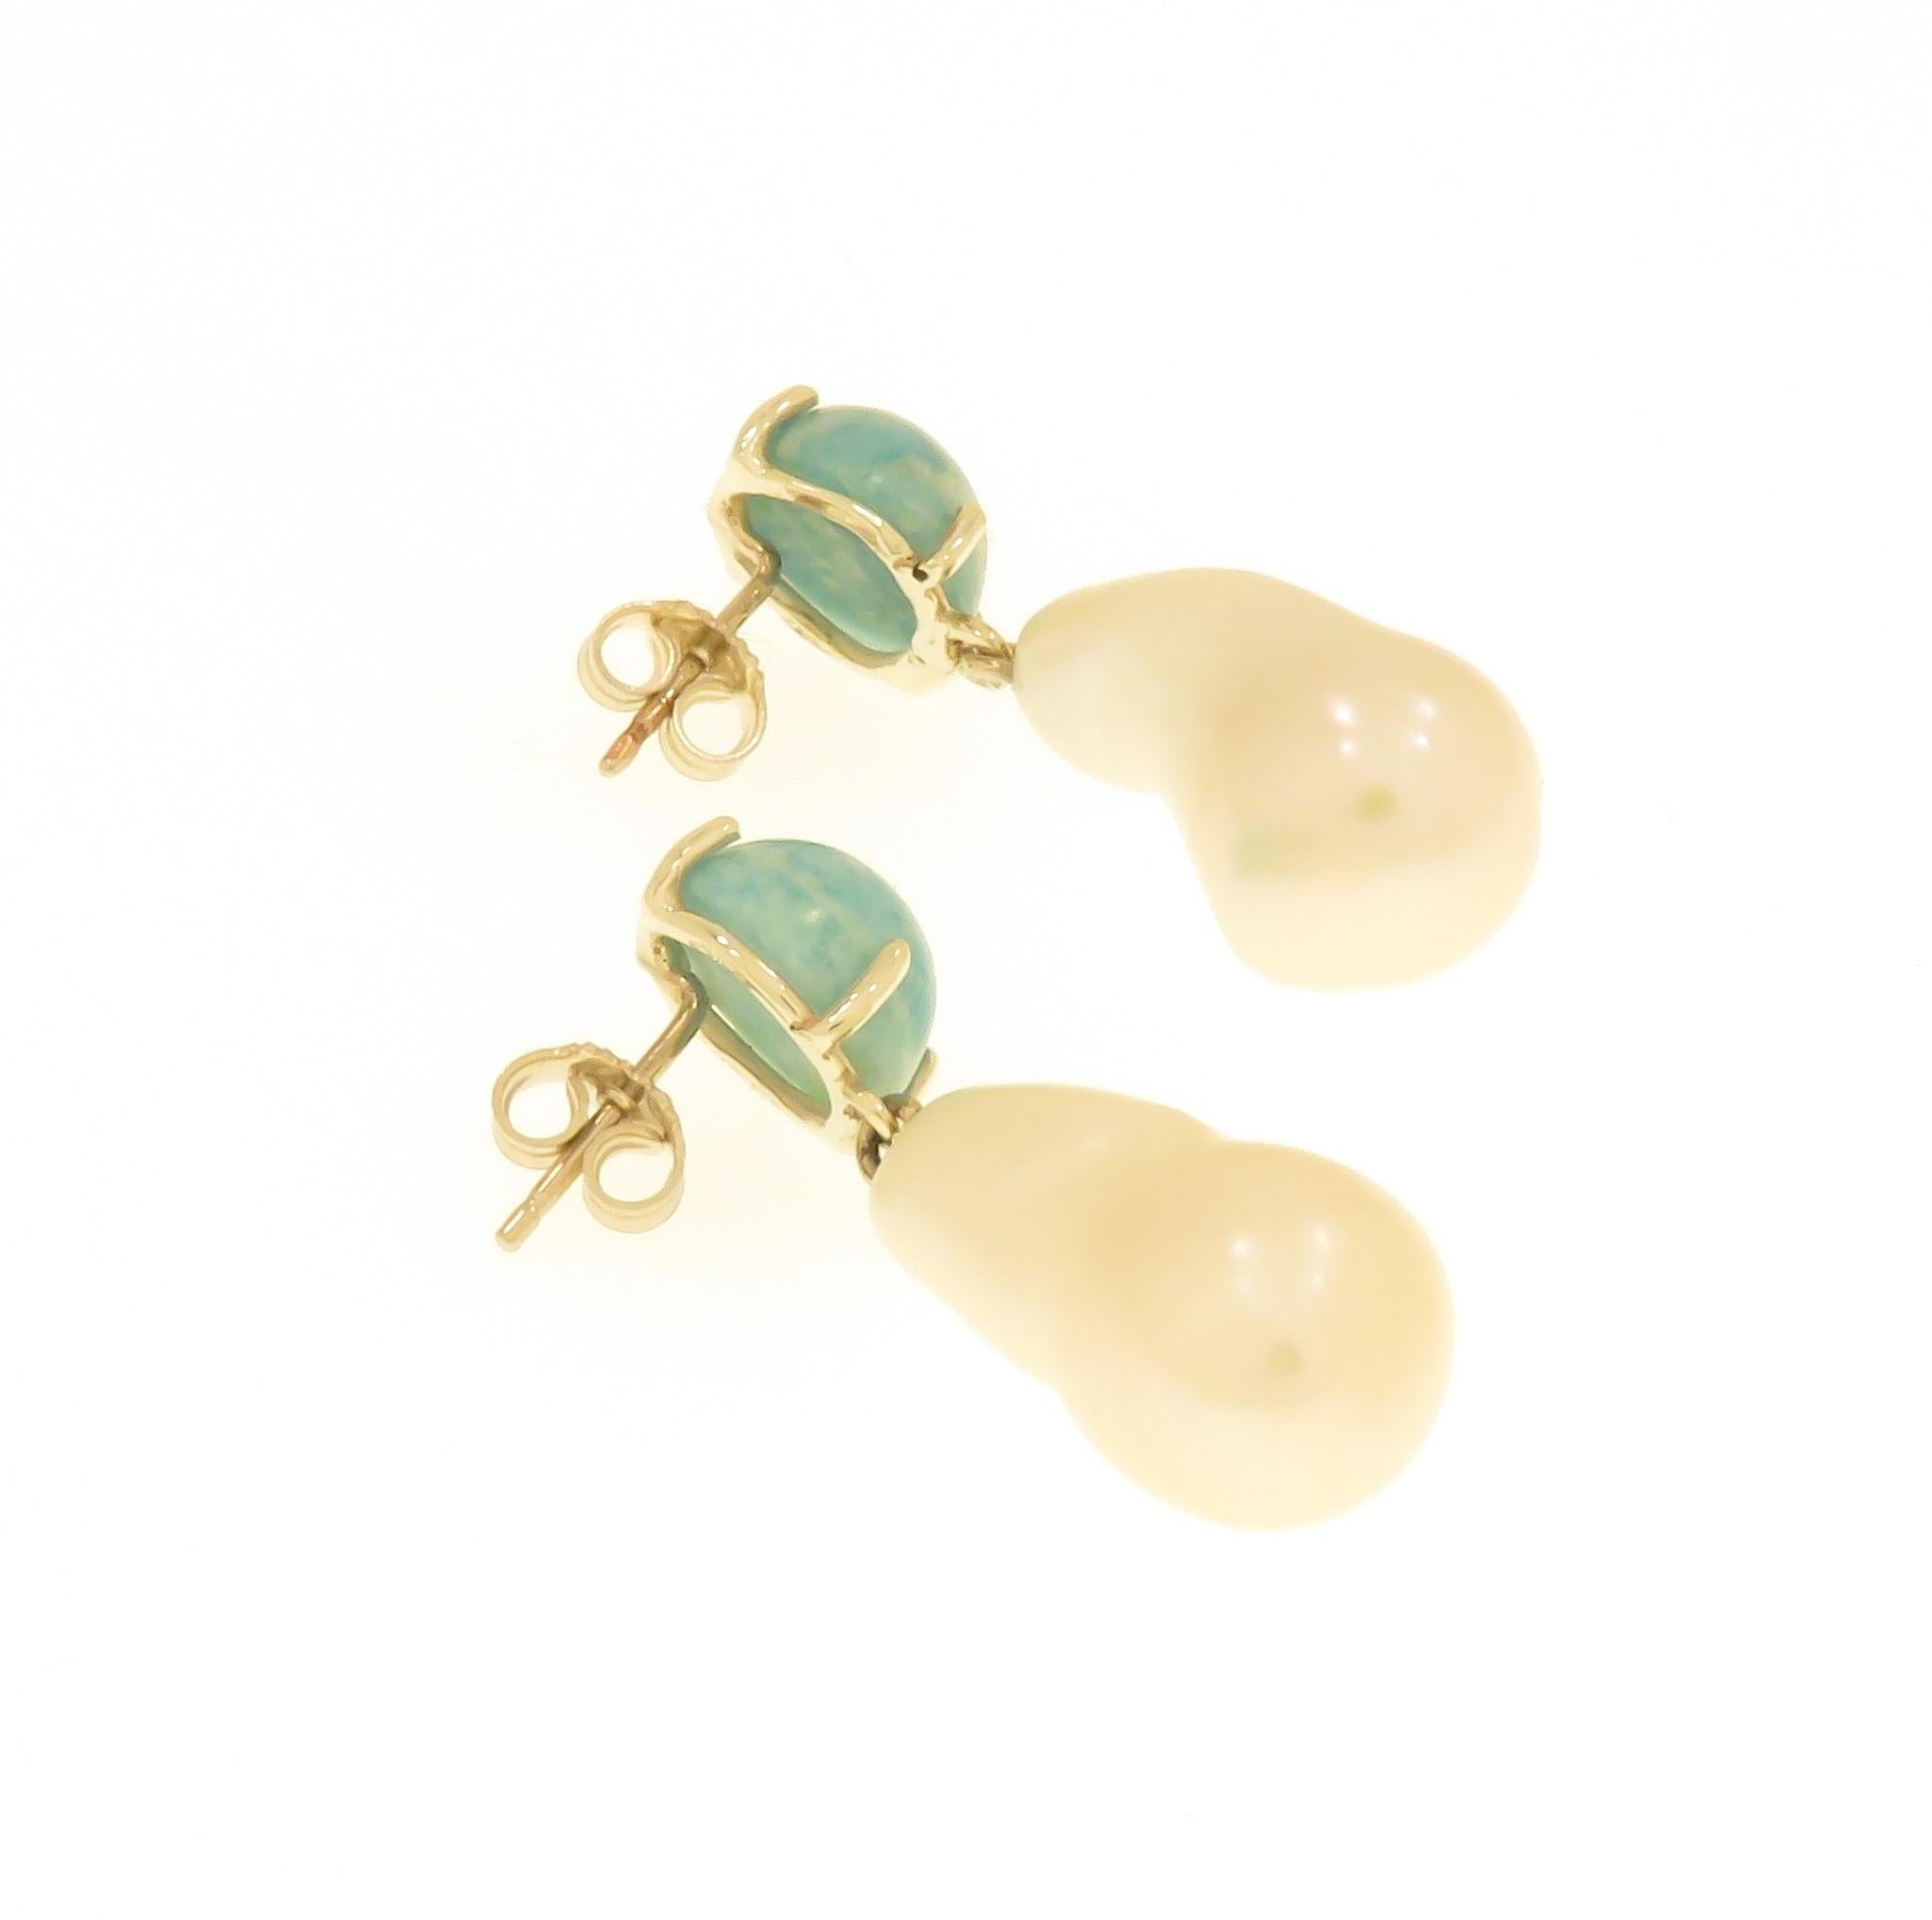 Cabochon Turquoise Freshwater Pearl 9 Karat White Gold Stud Earrings Handcrafted in Italy For Sale